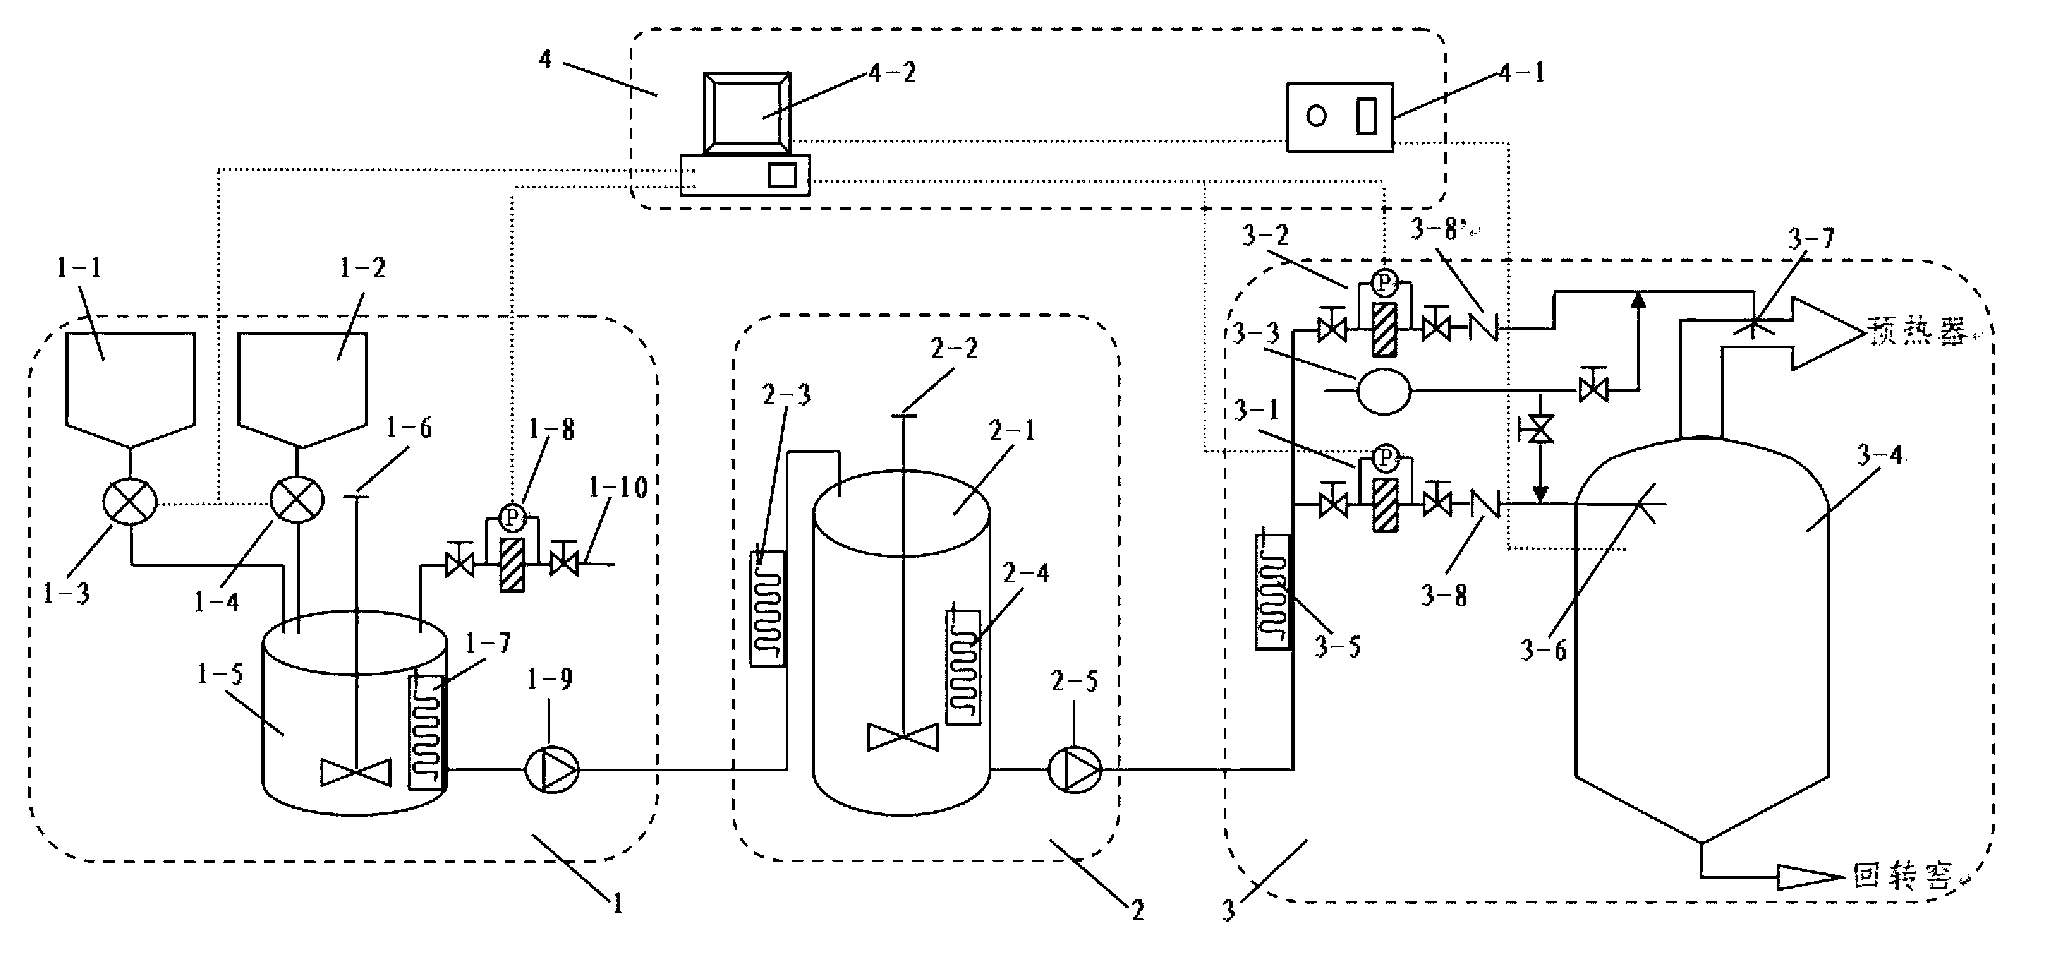 Method and apparatus for cement rotary kiln flue gas denitration and desulfurization